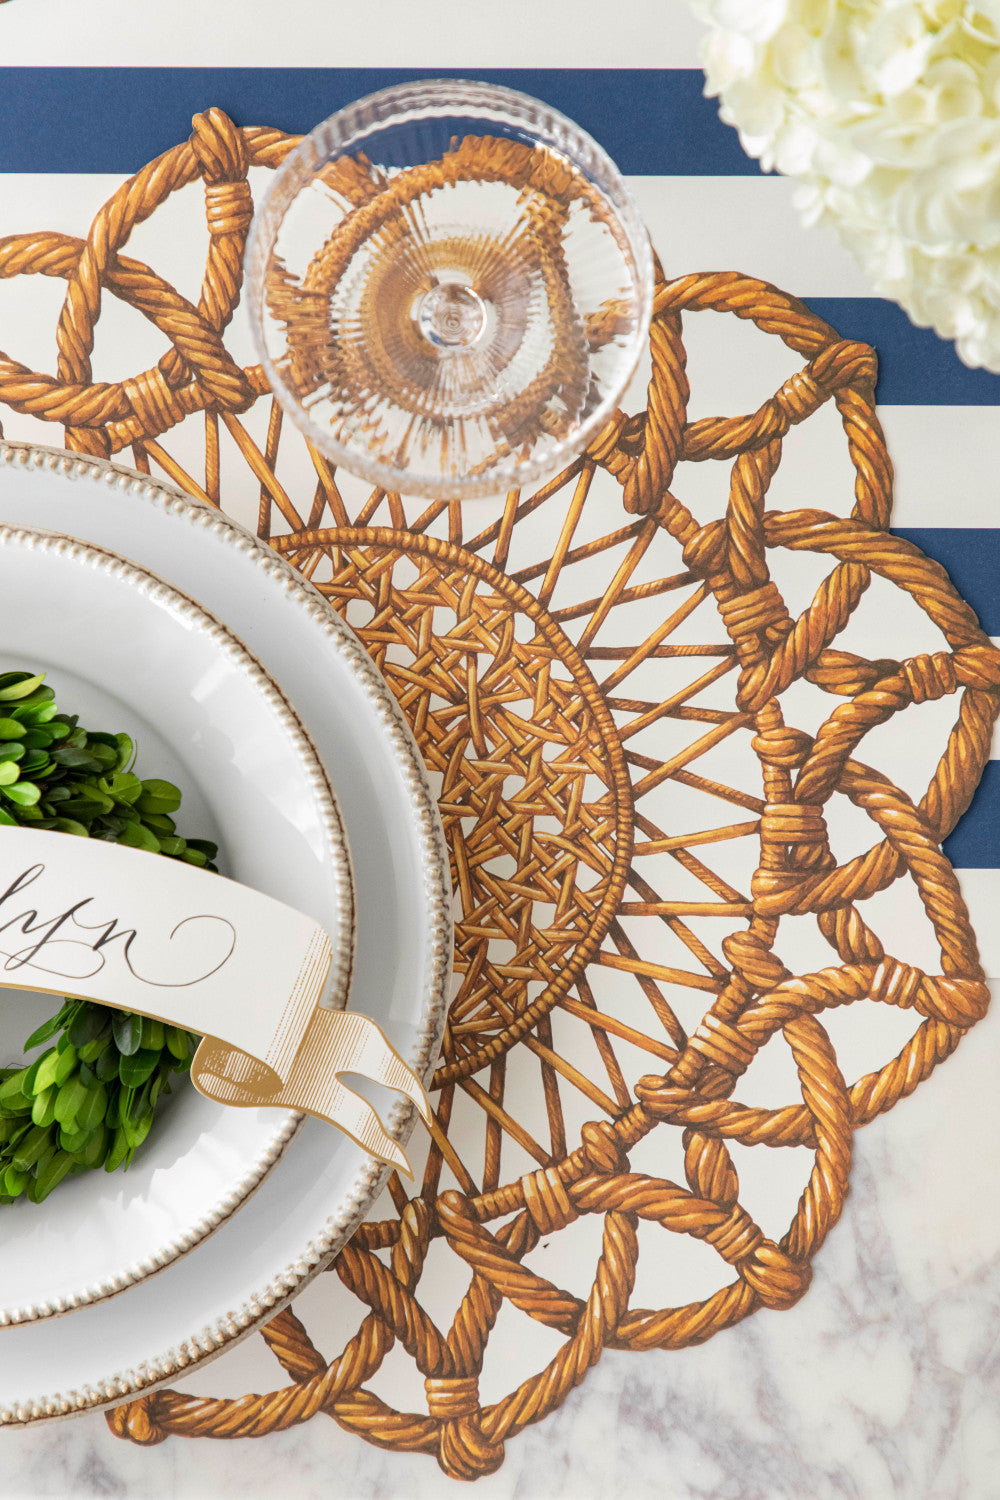 Close-up of the Die-cut Rattan Weave Placemat under an elegant place setting, from above.